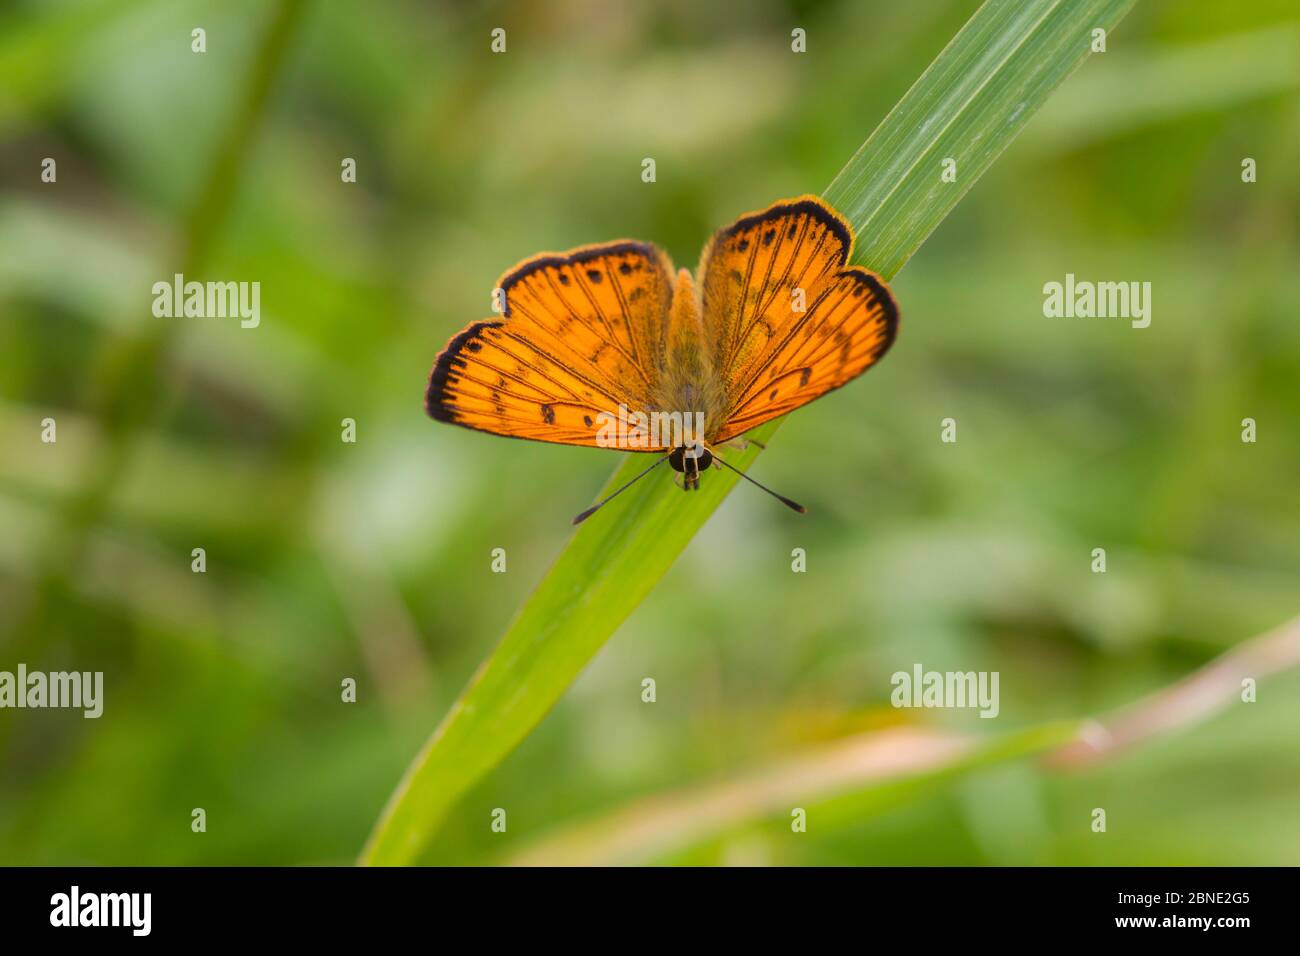 Male Common copper (Lycaena salustius) resting with wings open, showing the upperside patterning, Cape Kidnappers, Hawkes Bay, New Zealand, November. Stock Photo